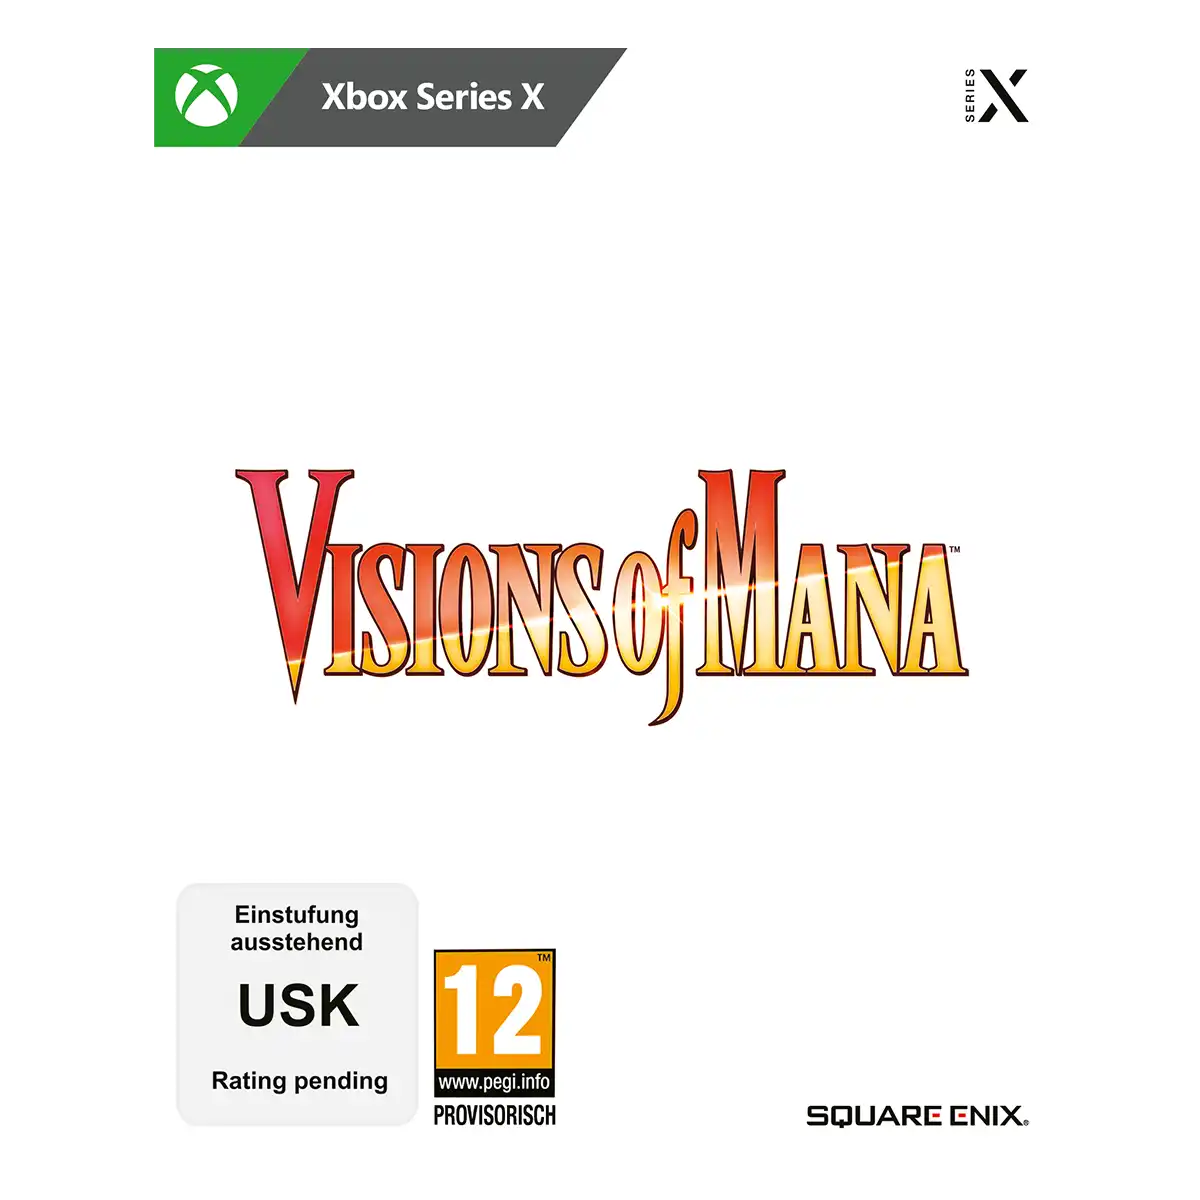 Visions of Mana (Xbox Series X)